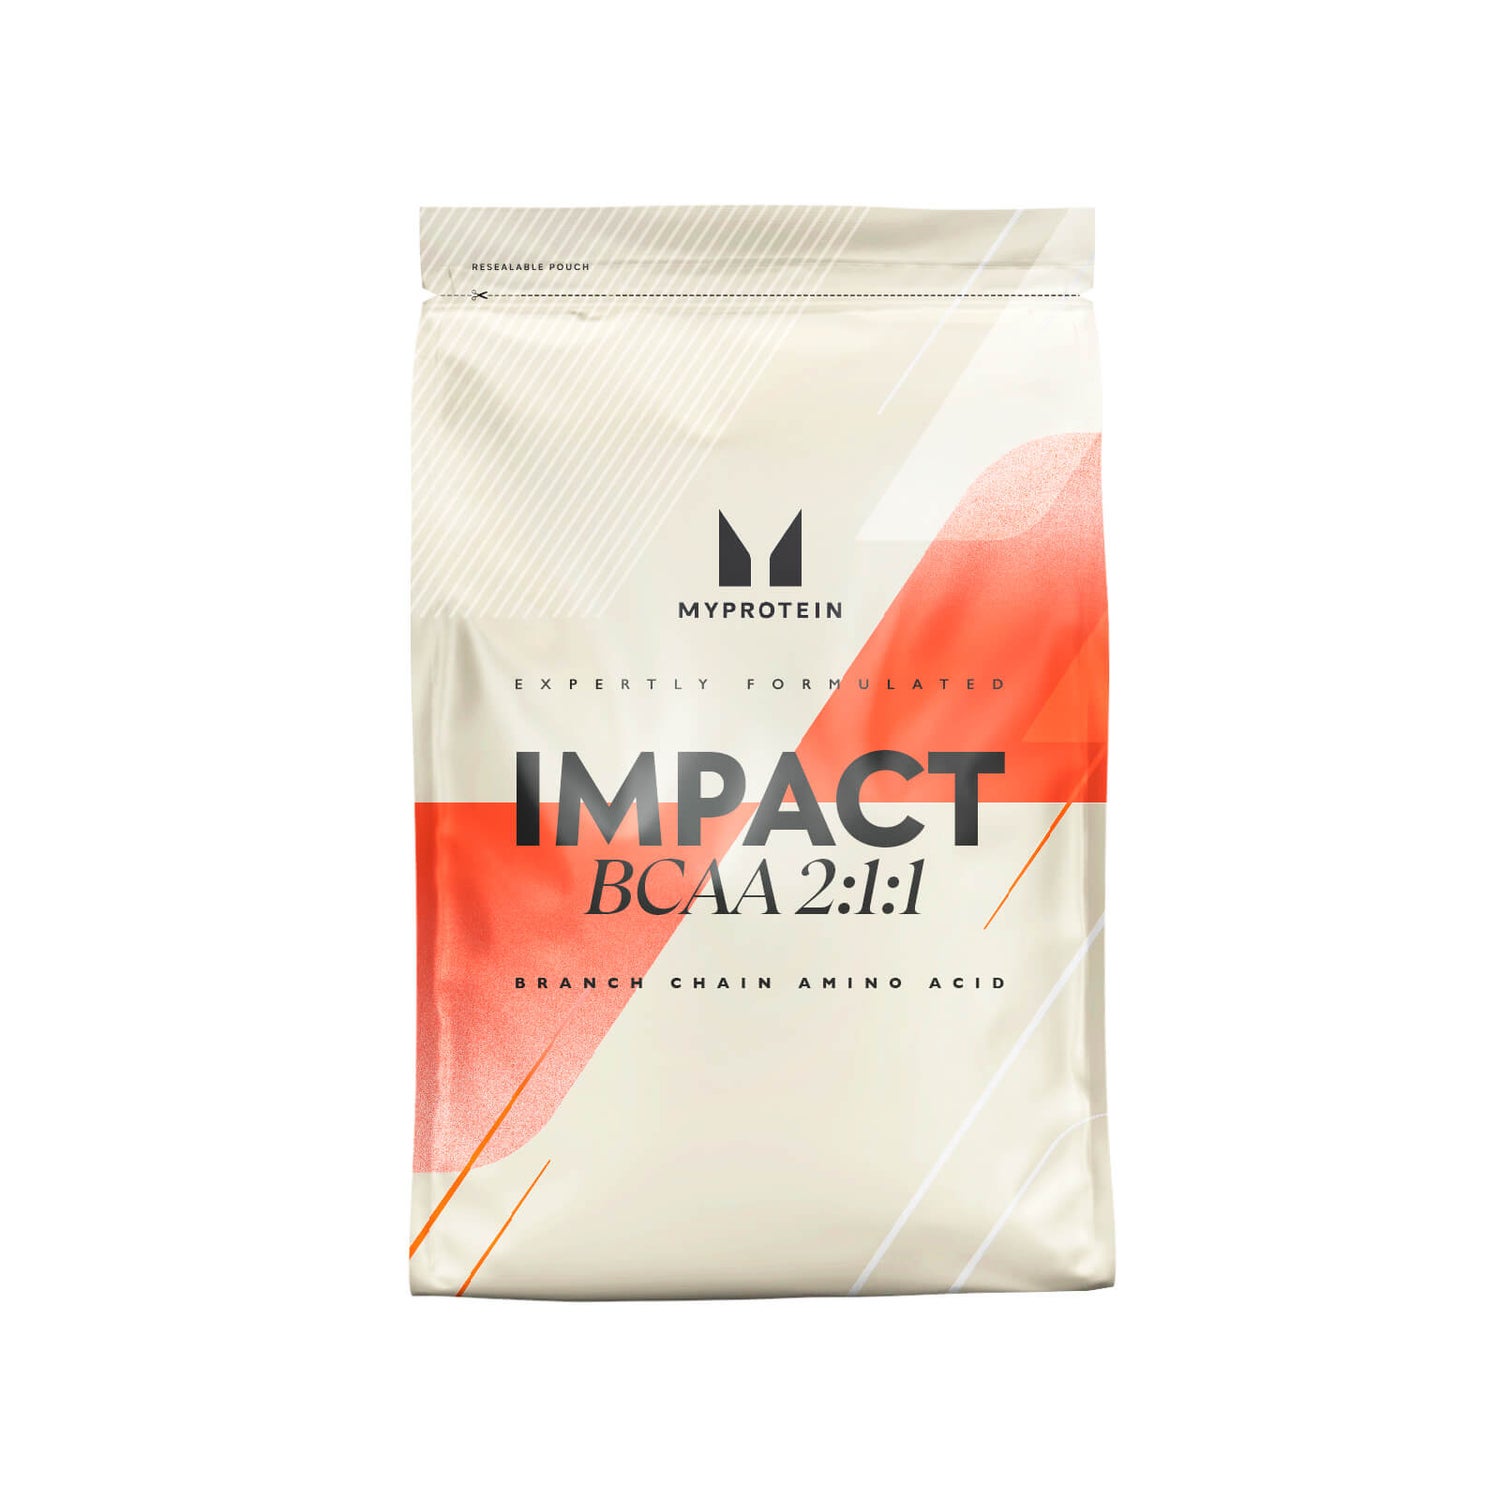 Impact BCAA 2:1:1 - 250g - Unflavoured